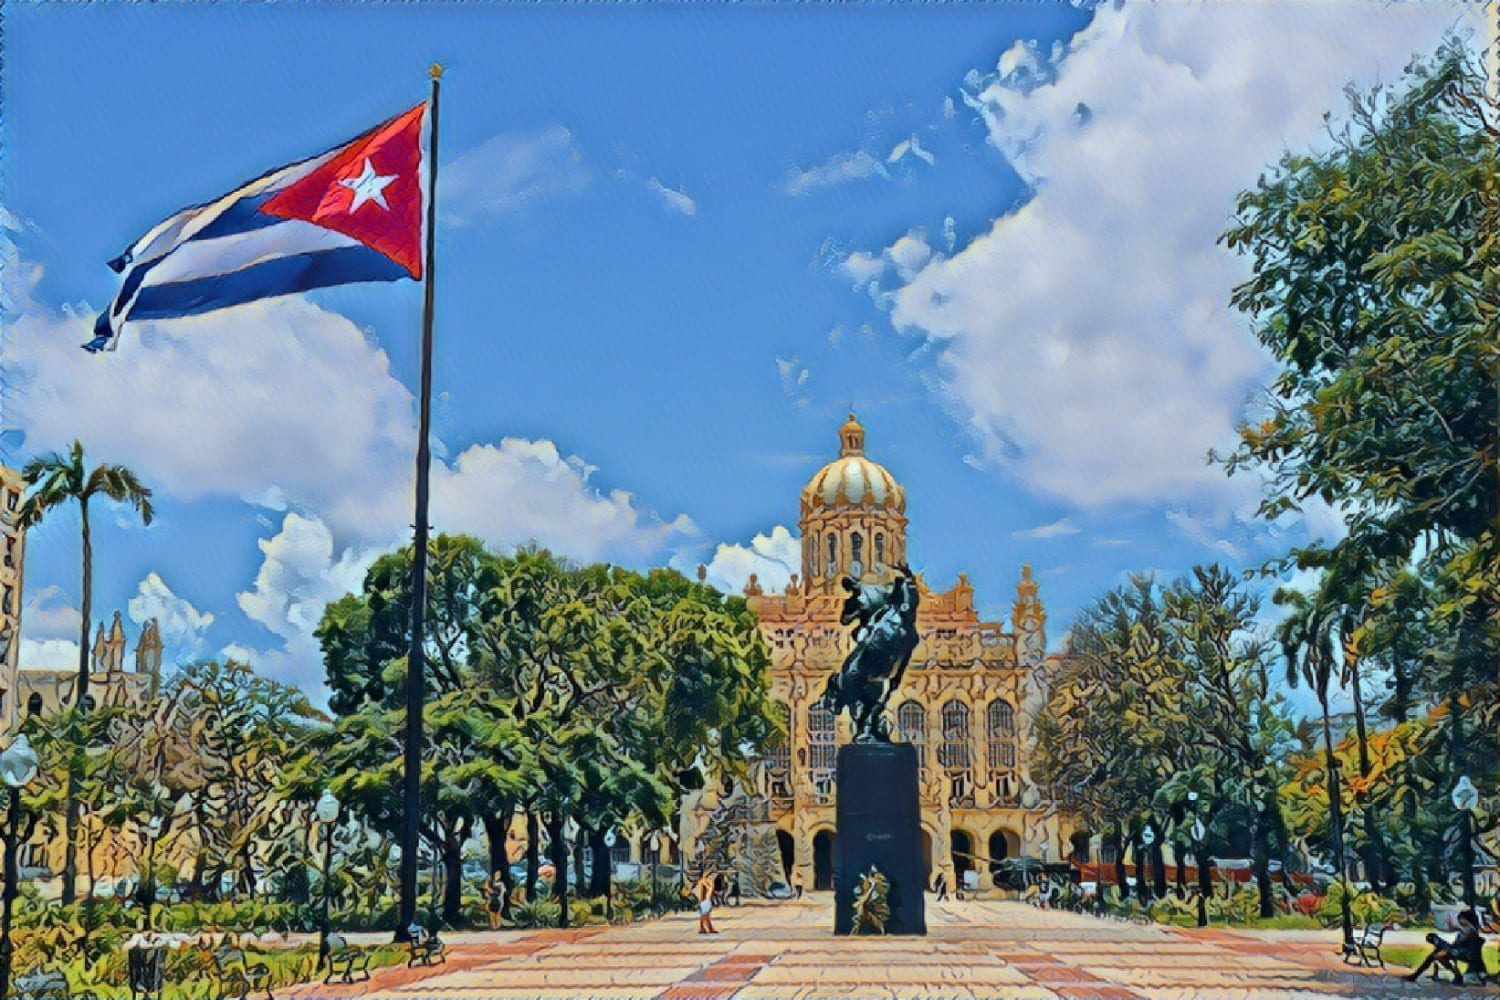 4 Lessons I Learned As a Solo Traveler In Cuba: A Photo Journal - Caffeinated Excursions